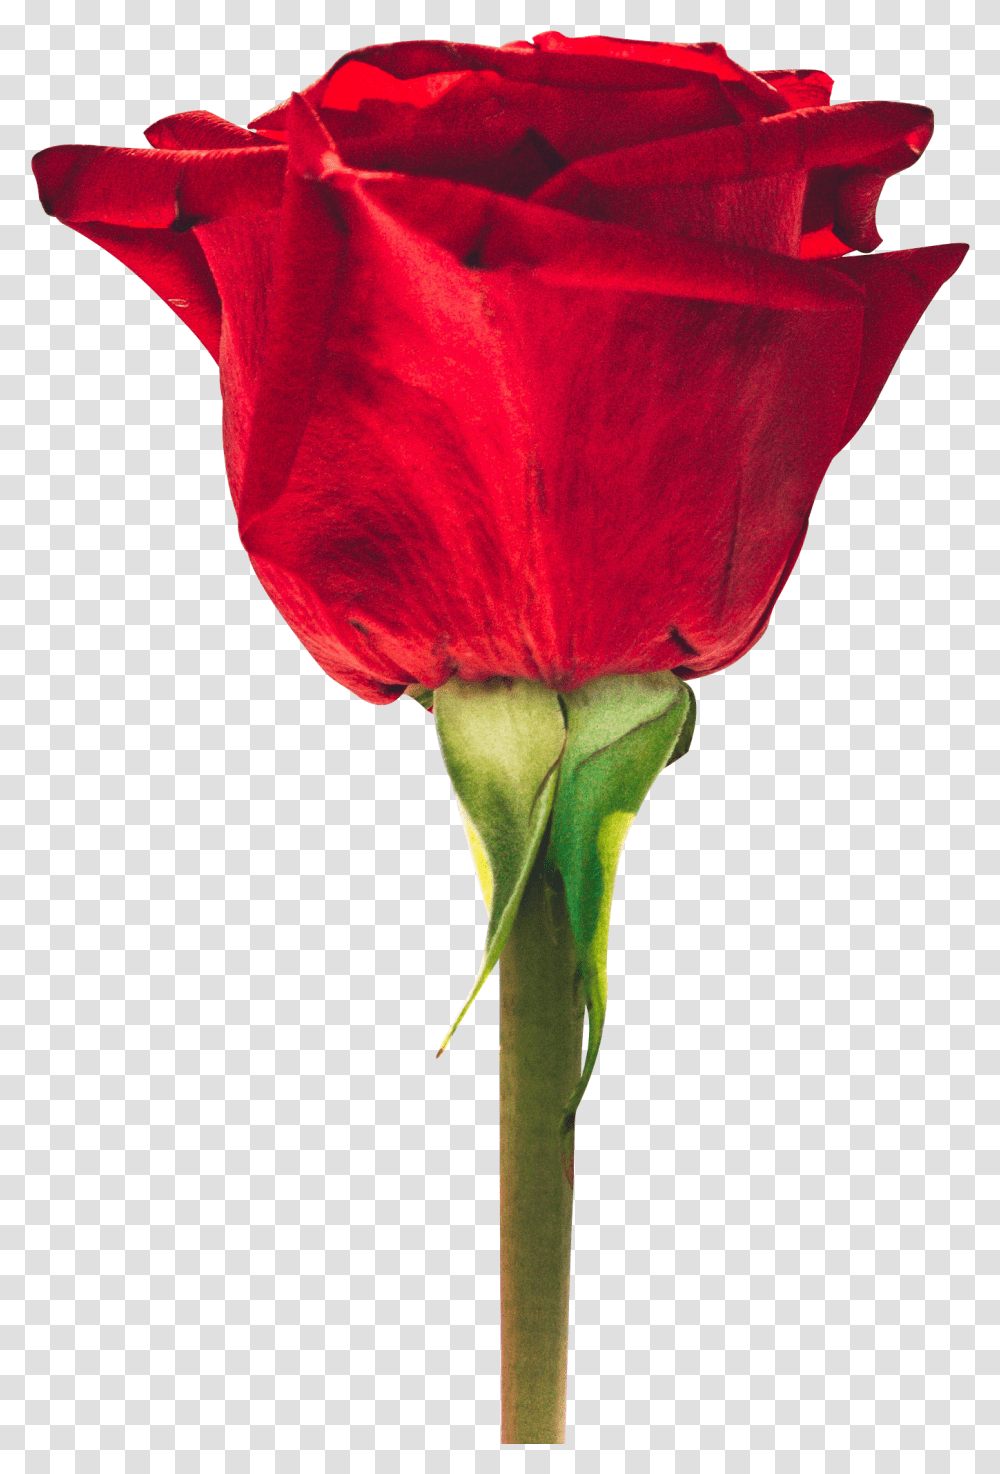 Beautiful Red Rose Free Download Searchpngcom Good Morning Flower Images With Quotes, Plant, Blossom, Petal, Tulip Transparent Png